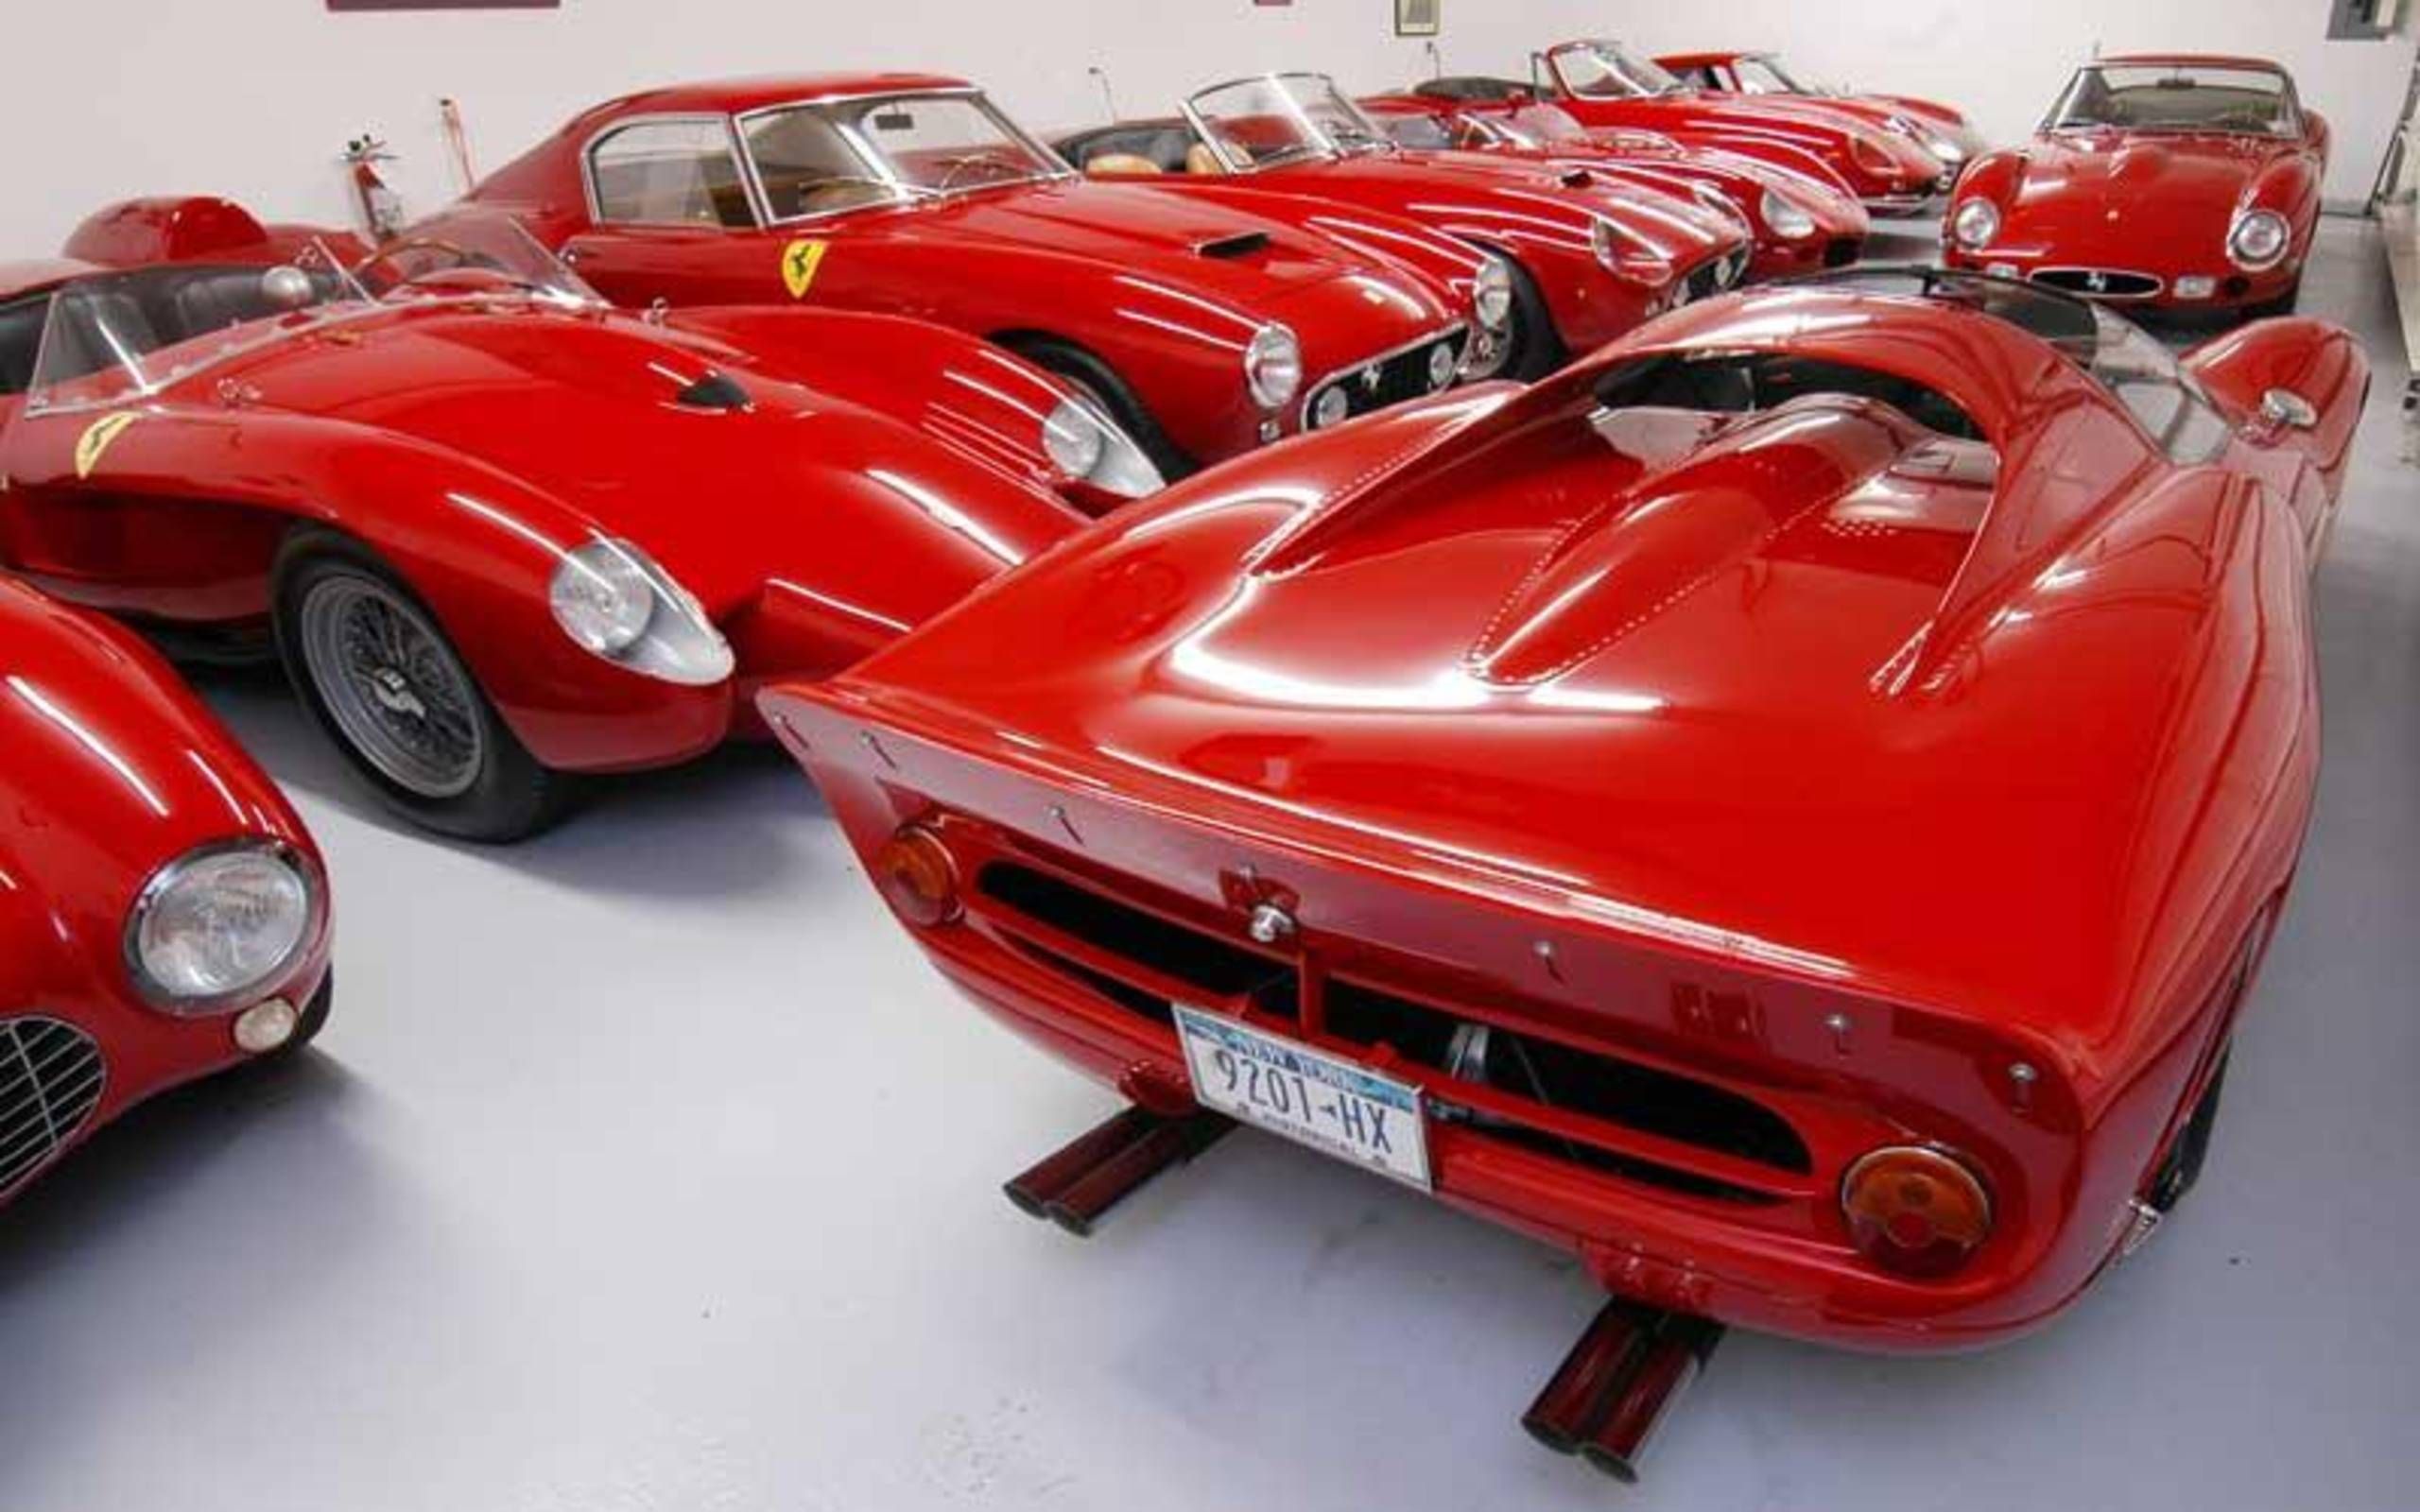 Ralph Lauren's Long Island Garage: Looking for the look: Finding the next  cool car gets harder every day